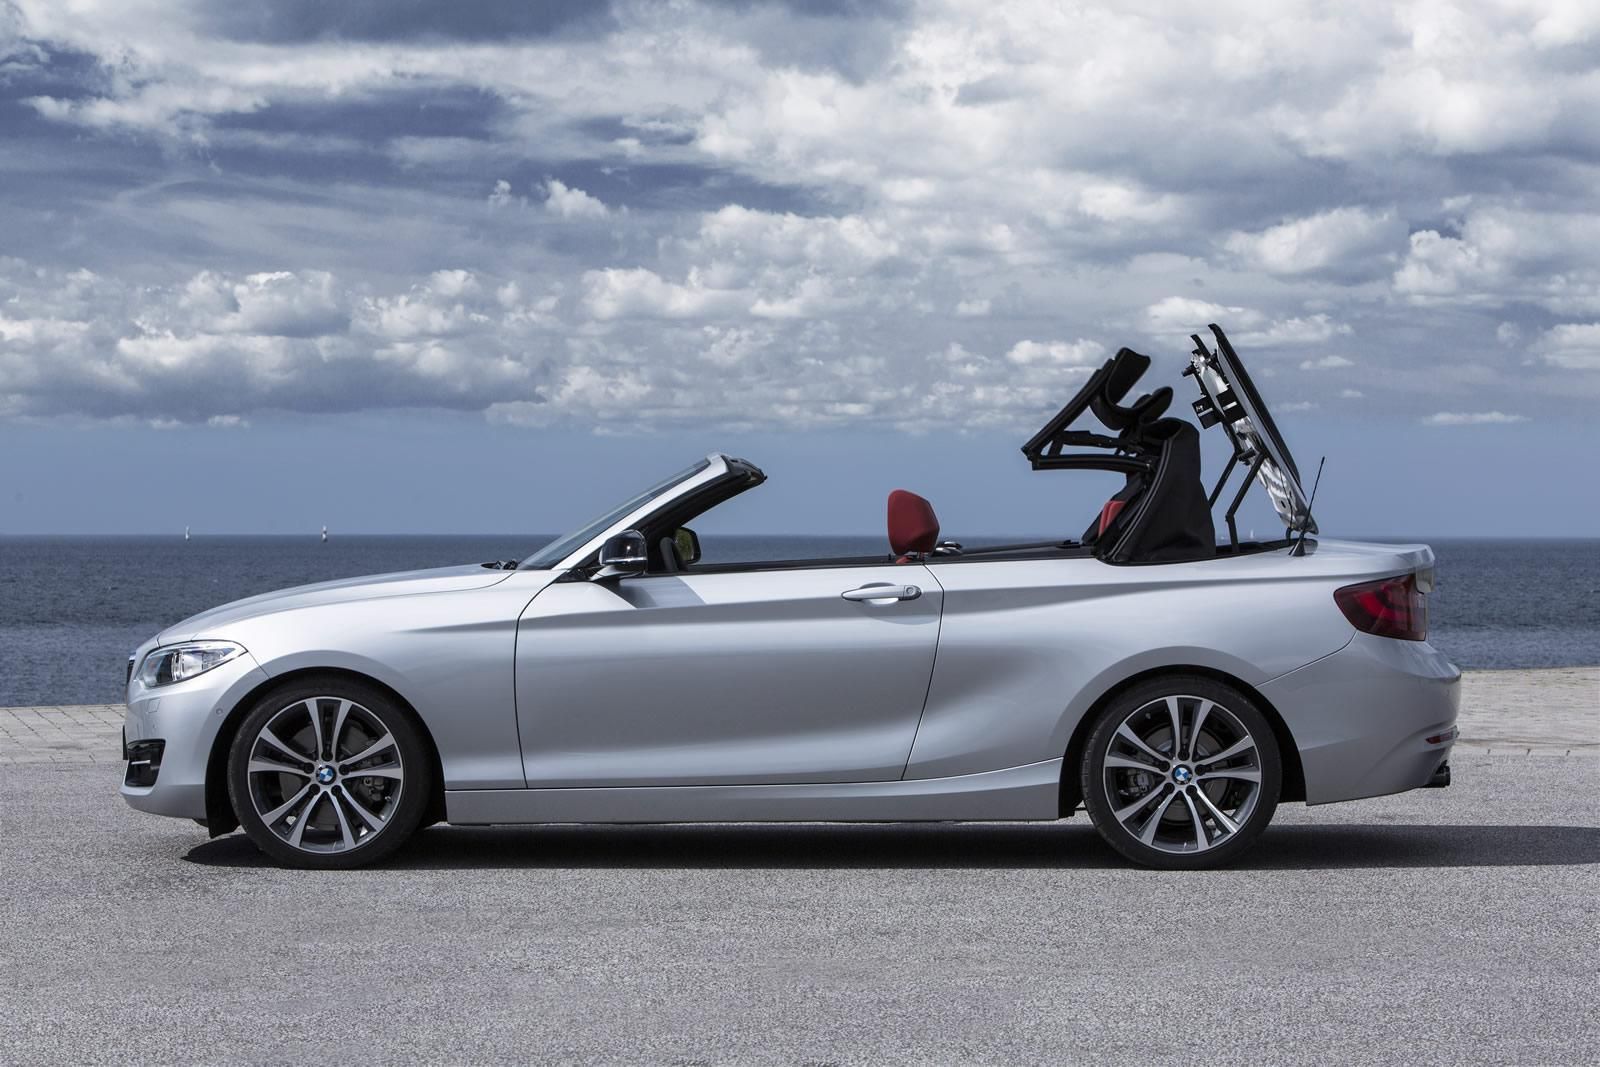 YEN 2015 BMW 2 SERS CONVERTIBLE RESM GALERS